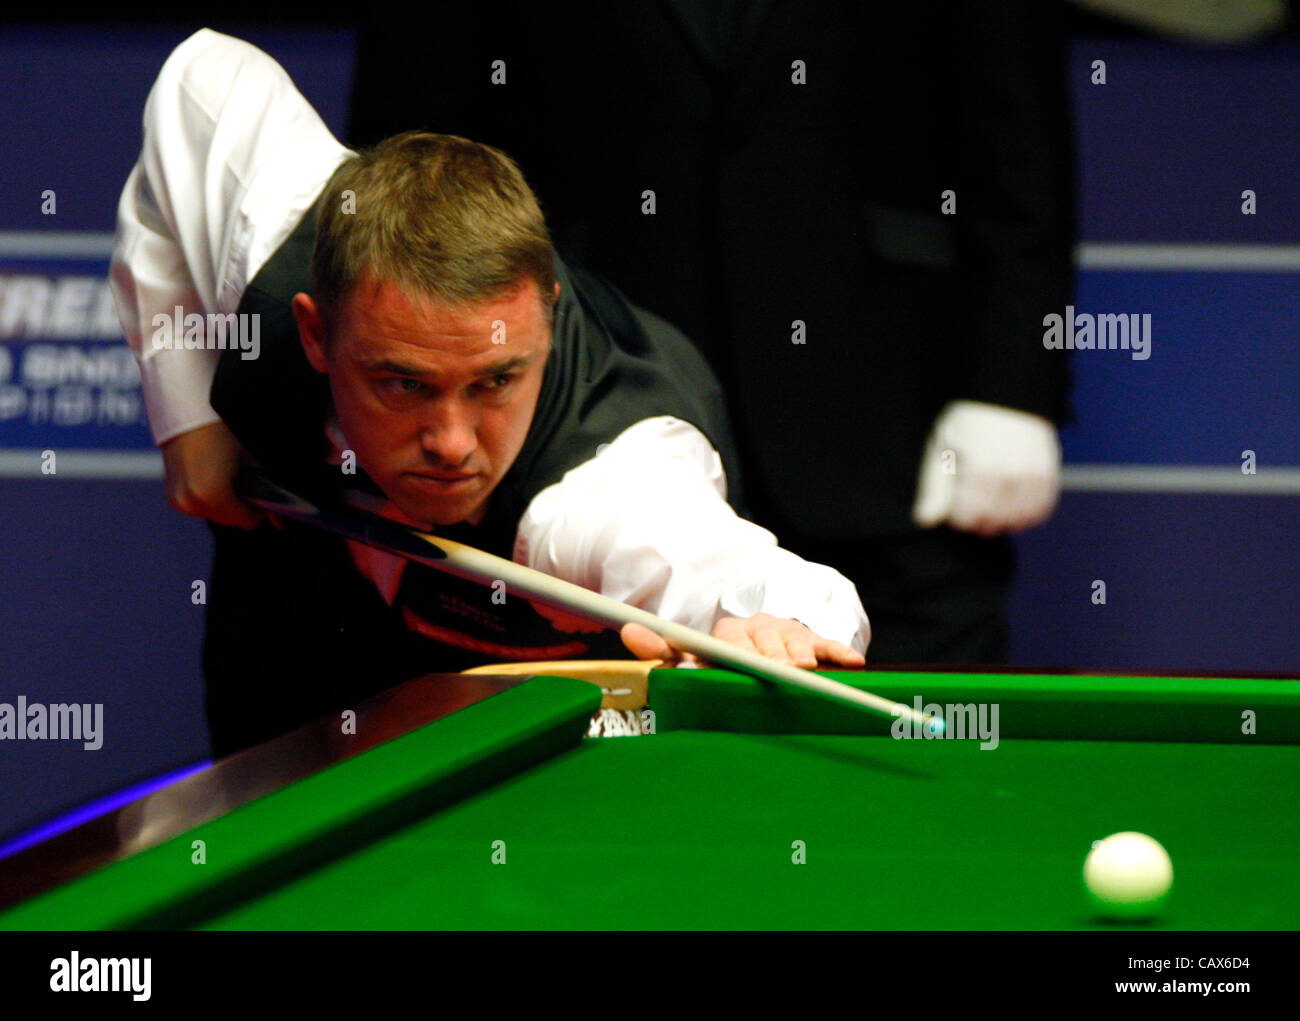 01.05.2012 Stephen Hendry in action against Stephen Maguire at the quarter-final of the World Snooker Snooker Championships at the Crucible, Sheffield. UK. Stock Photo